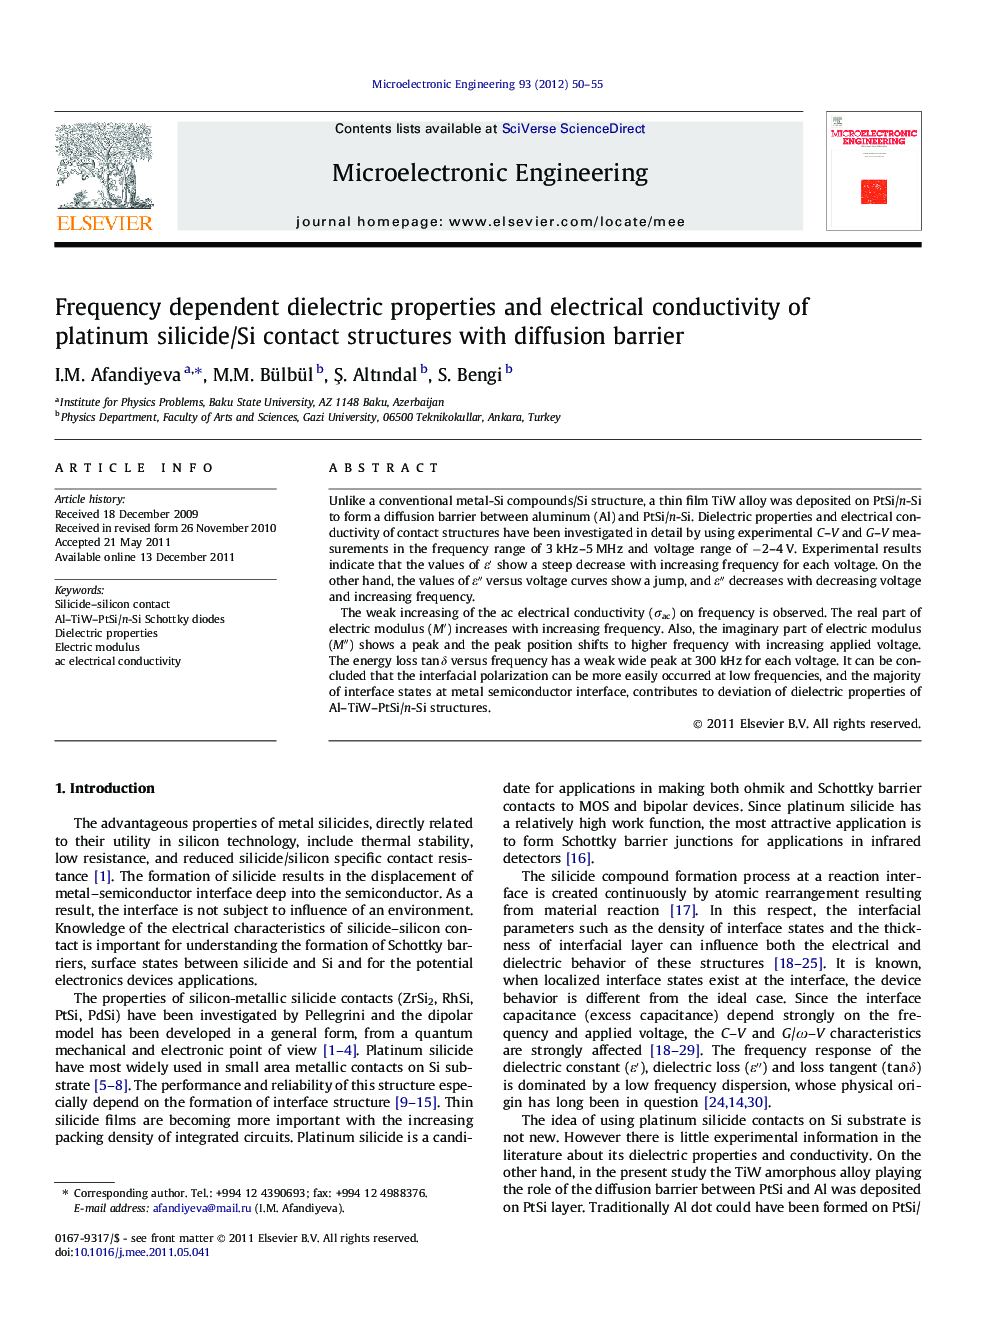 Frequency dependent dielectric properties and electrical conductivity of platinum silicide/Si contact structures with diffusion barrier